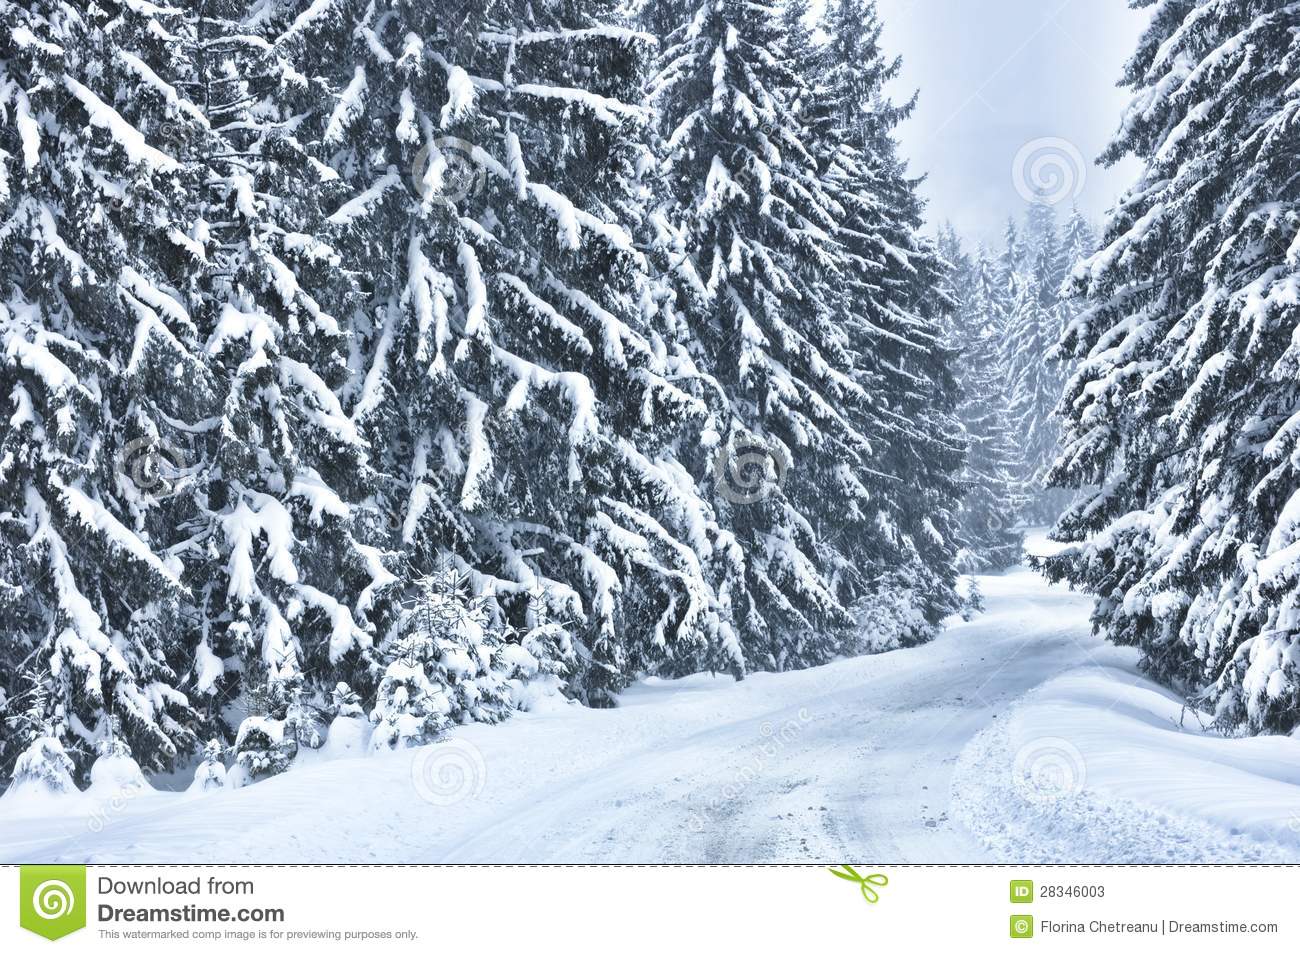 Winter Scene With Trees In The Forest Stock Photos   Image  28346003